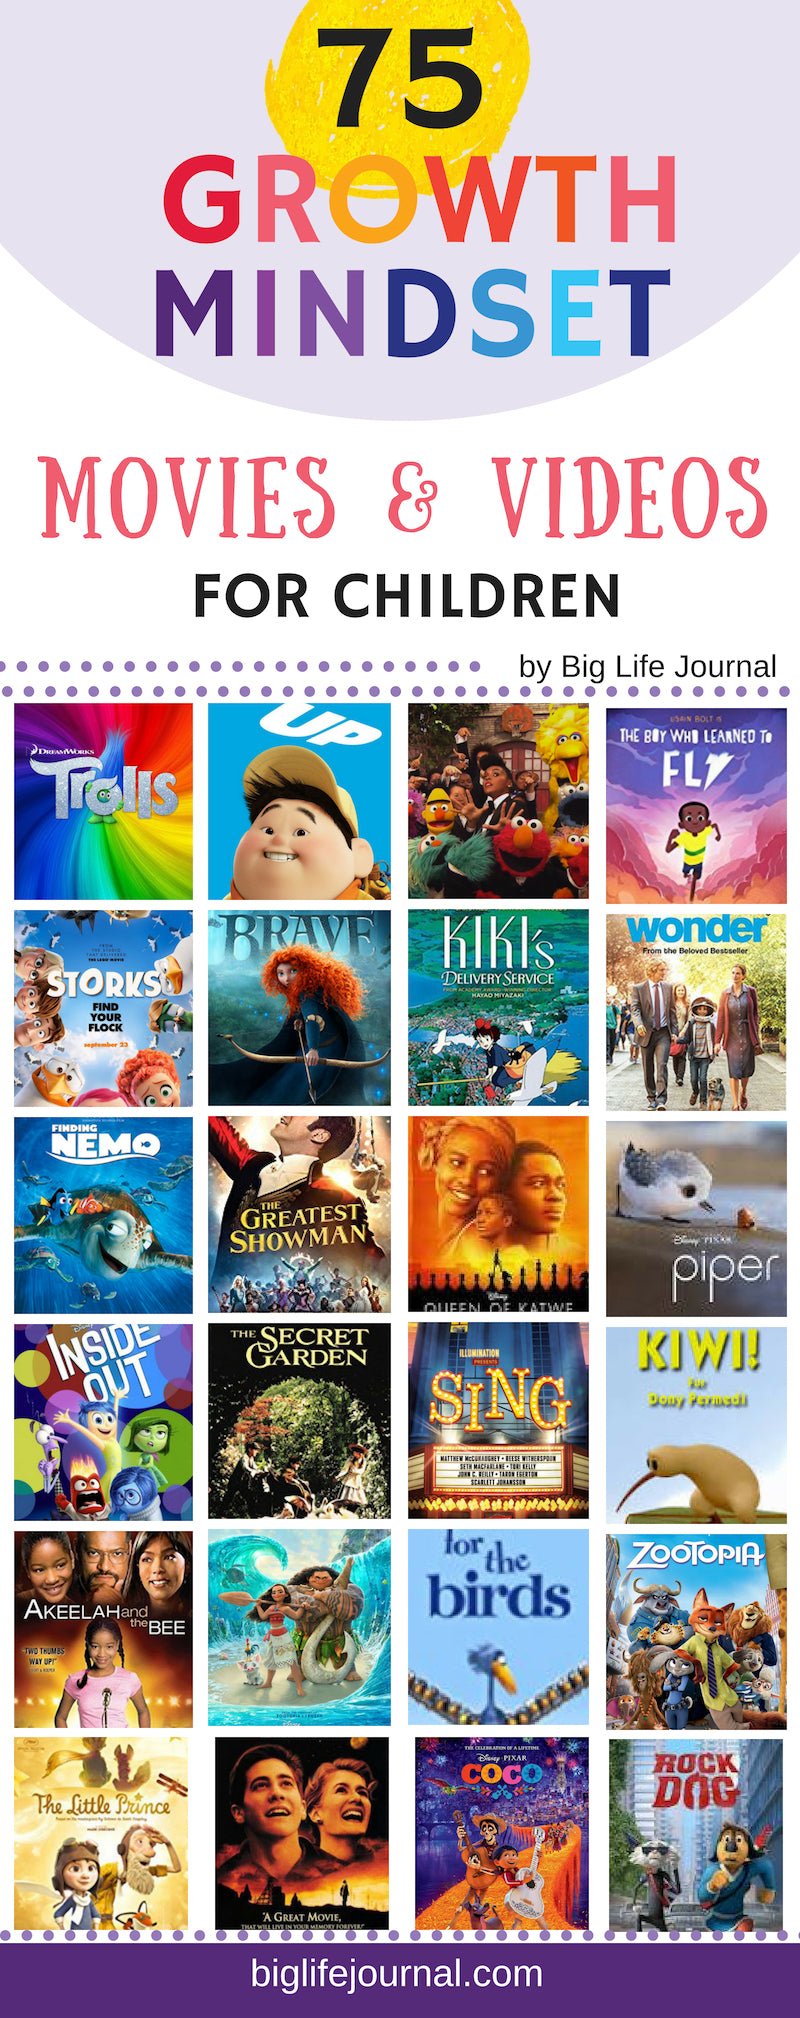 Top 75 Growth Mindset Movies For Children Big Life Journal